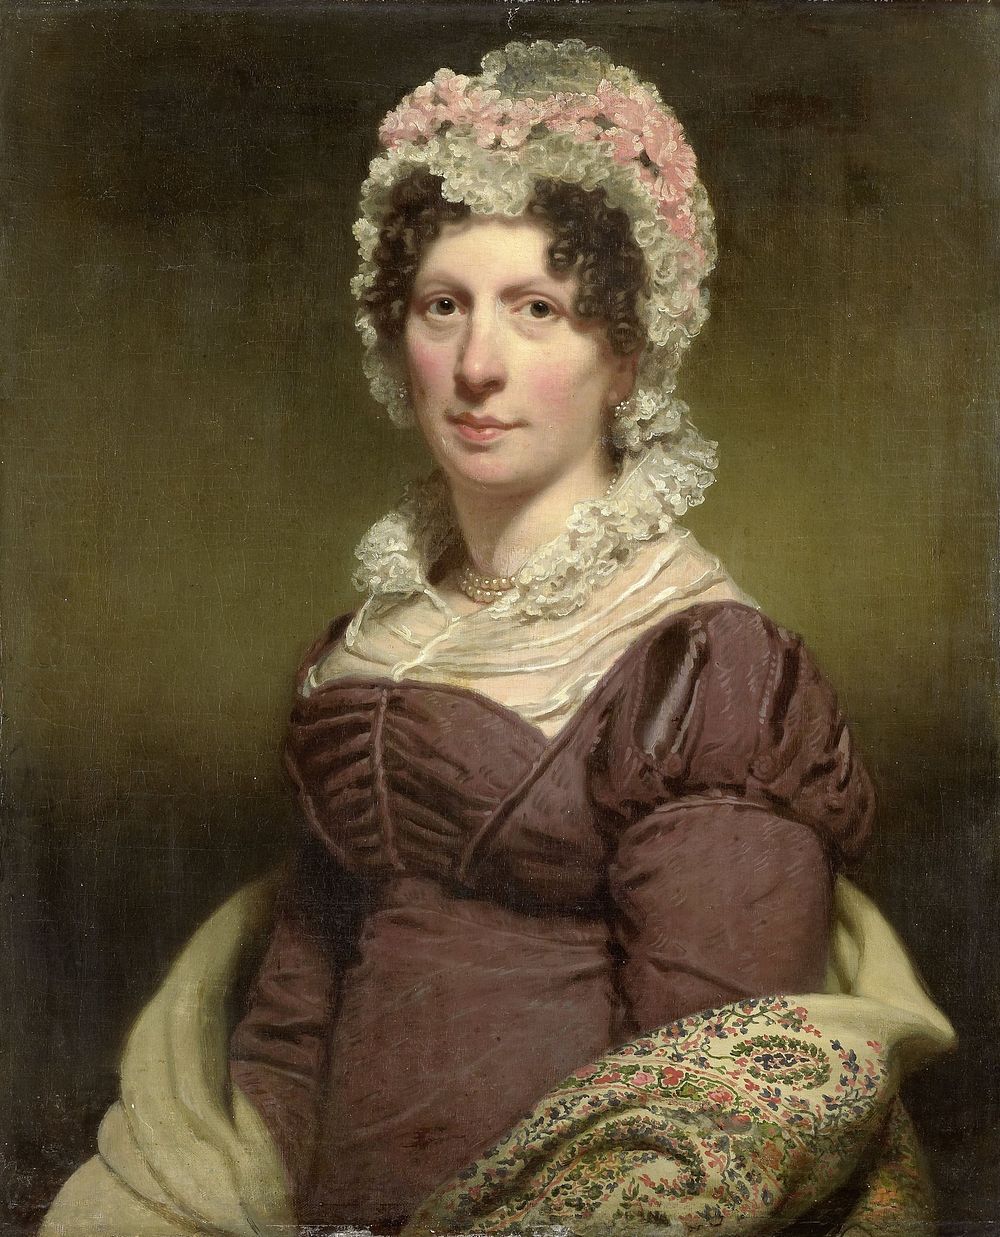 Portrait of a Woman (c. 1812 - c. 1813) by Charles Howard Hodges